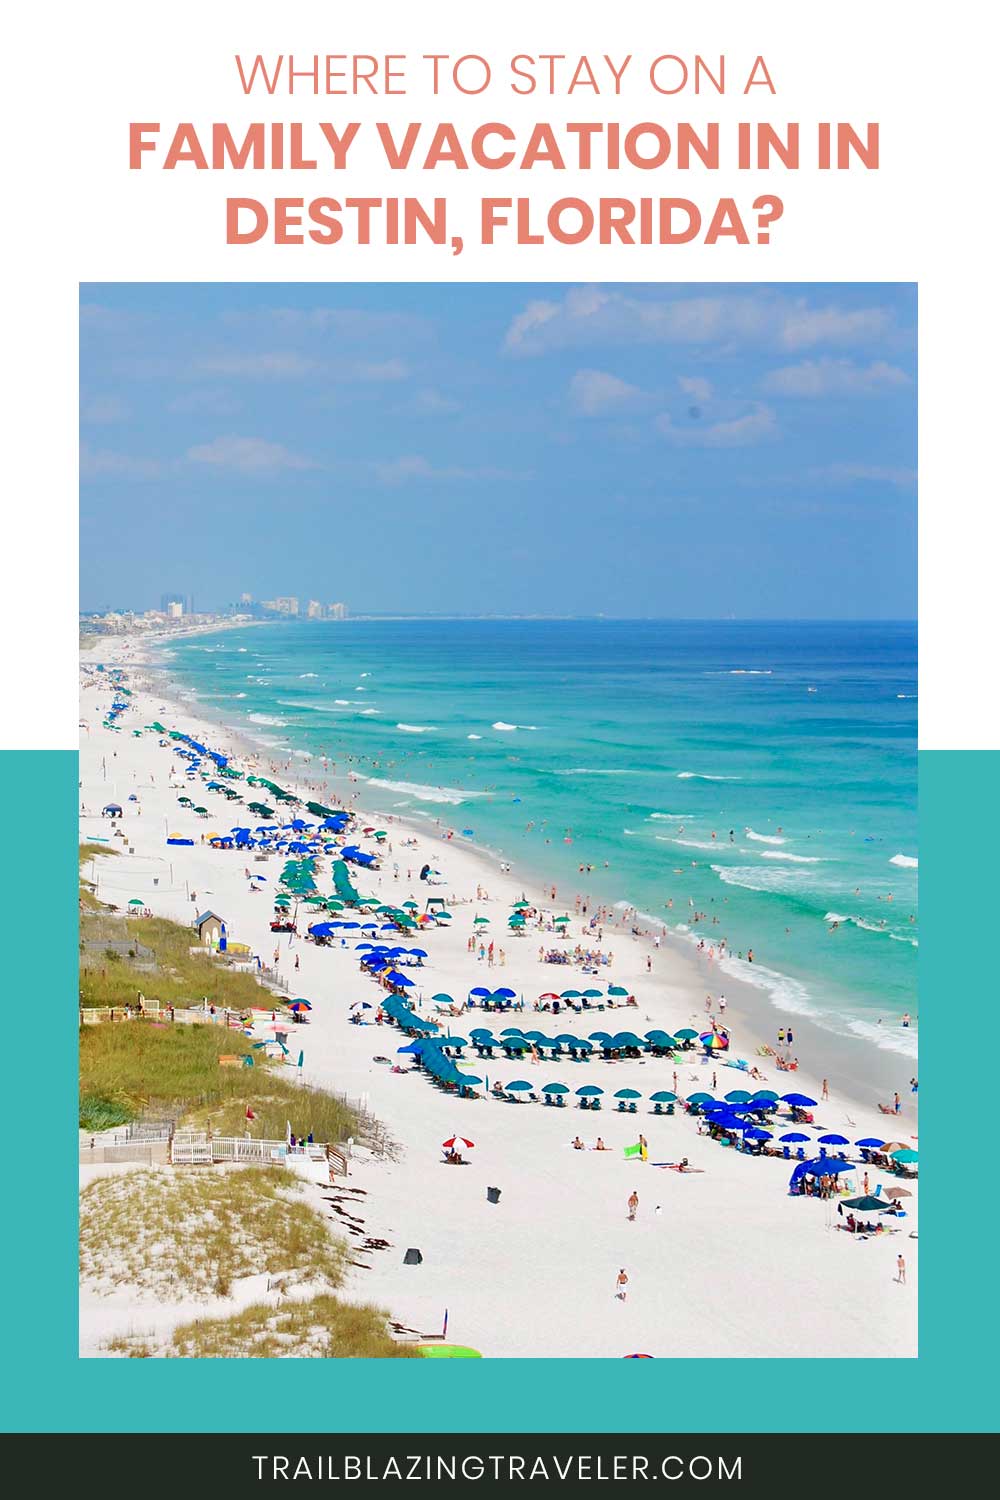 Where To Stay On A Family Vacation in In Destin, Florida?